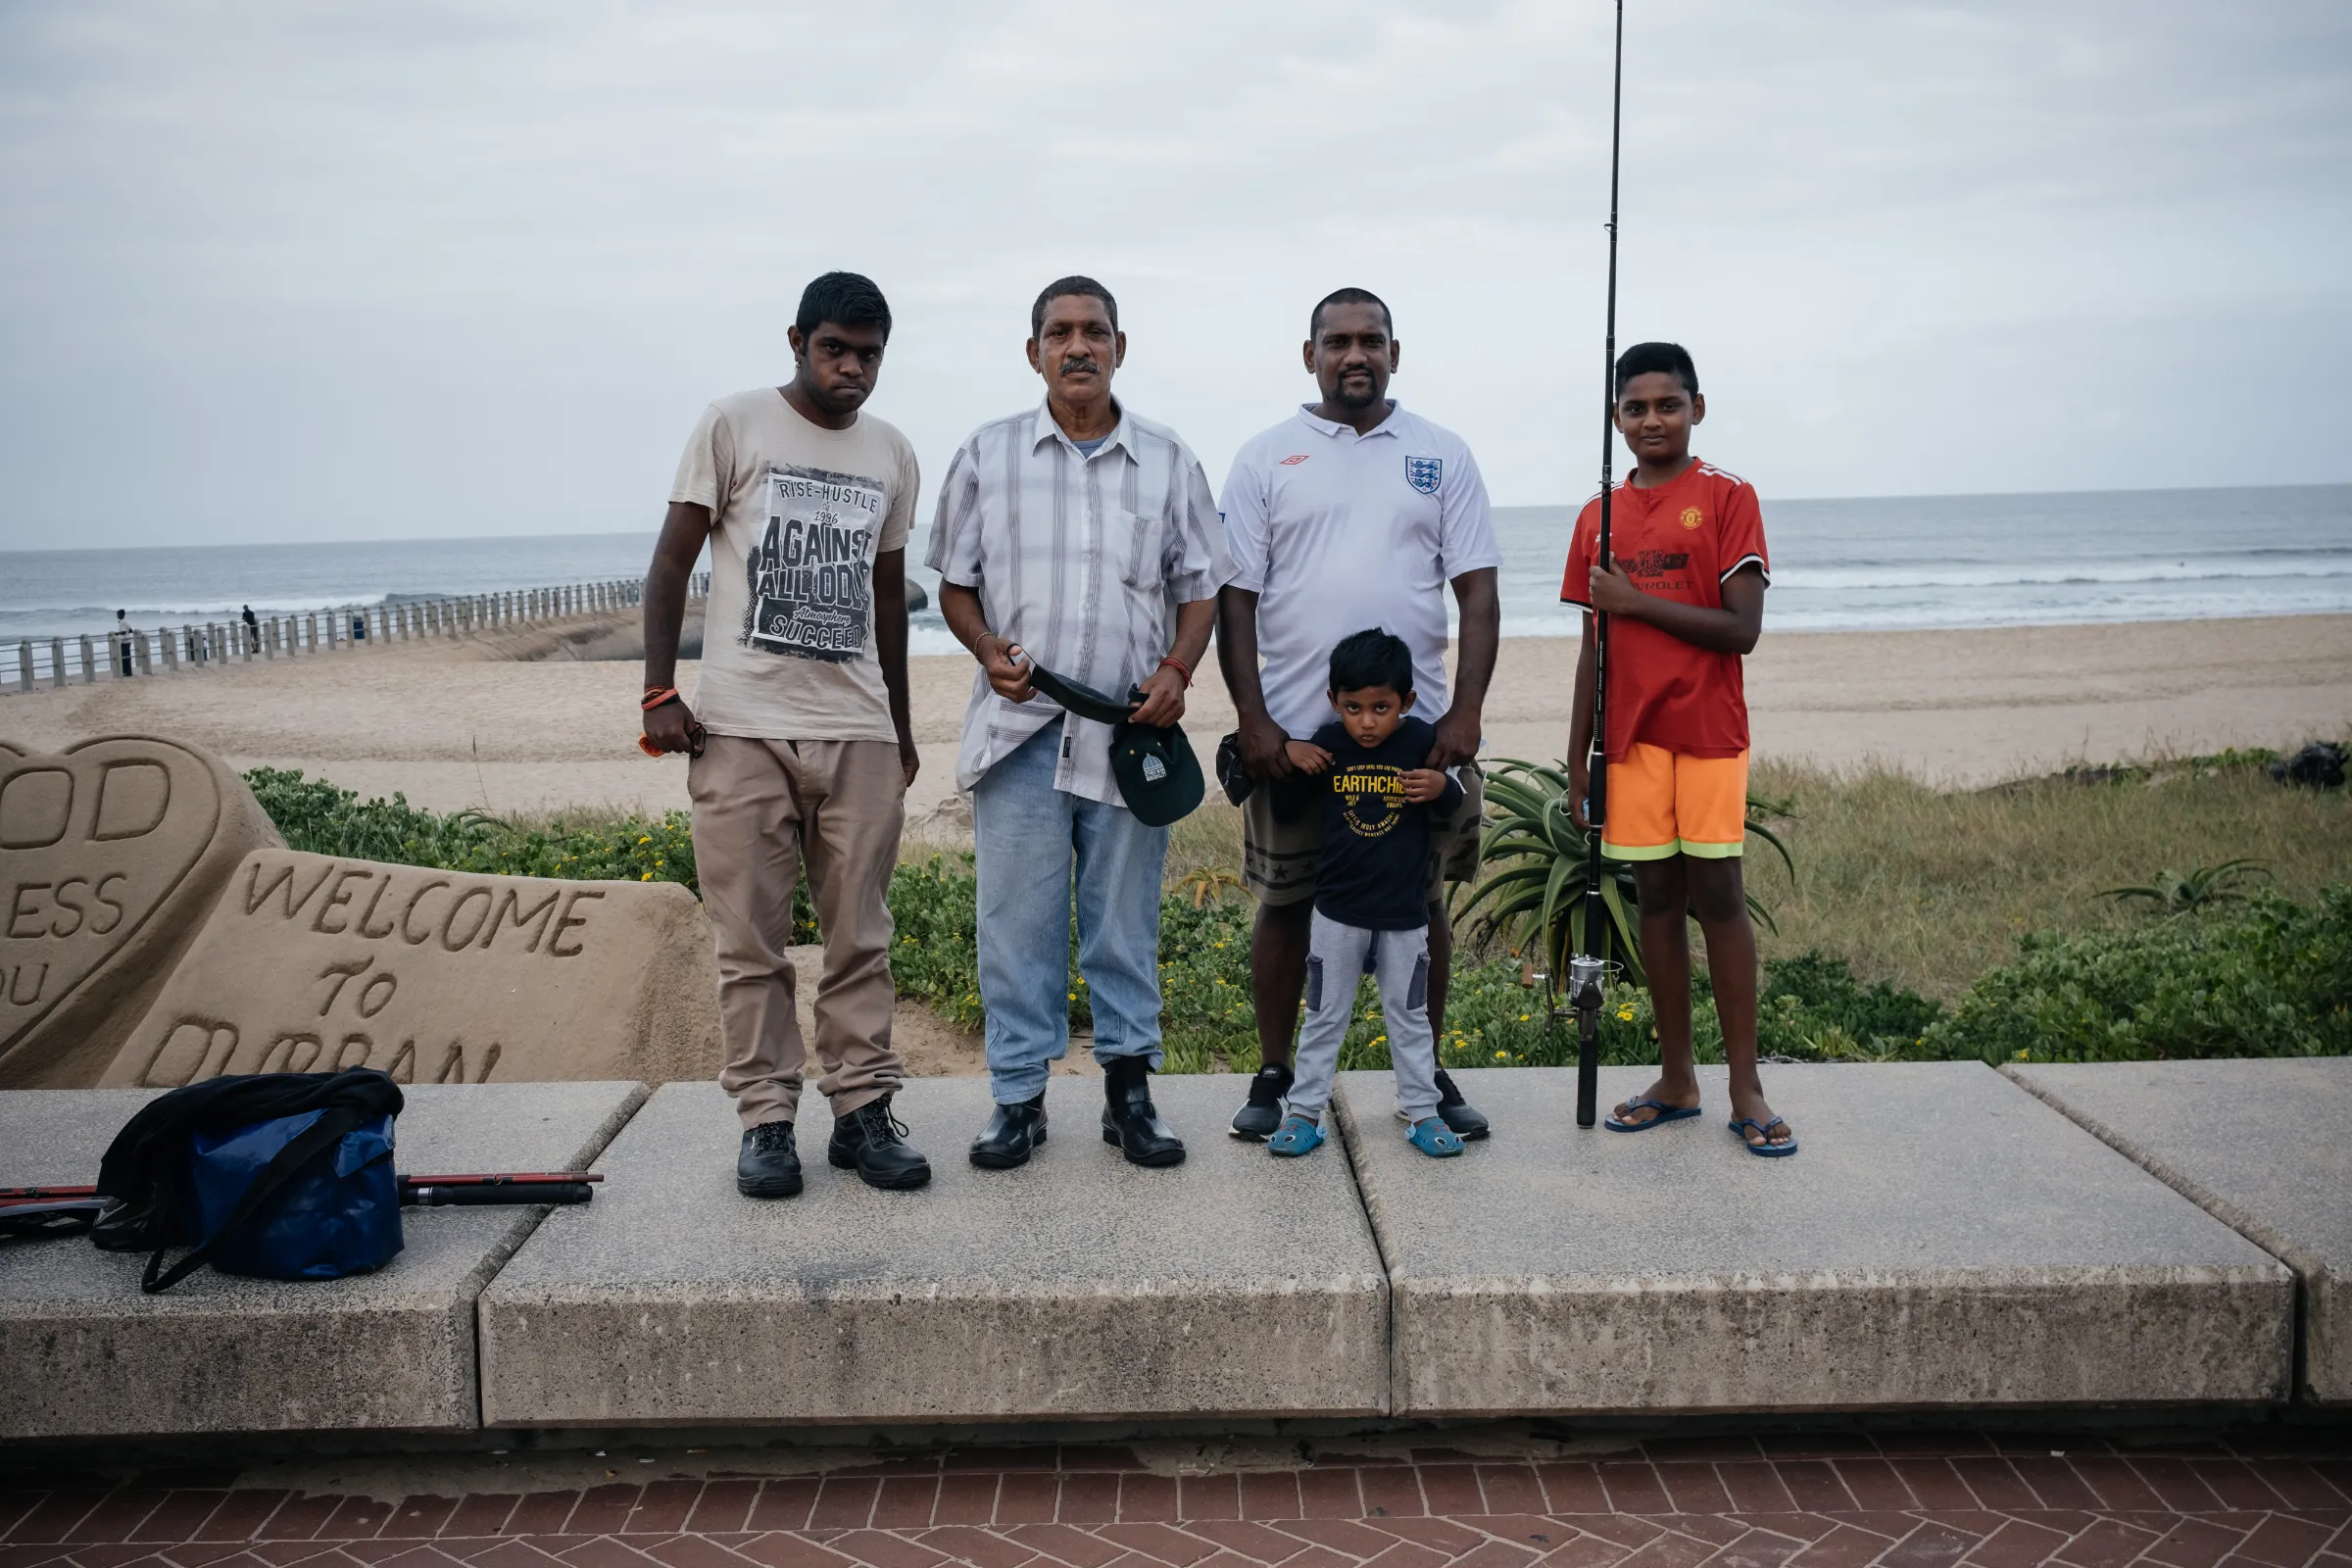 Subsistence anglers look for a catch at Snakepark Pier on the beachfront in Durban, South Africa, April 1, 2021. They fear warming oceans, sea level rise and decreases in the diversity of fish species will hit their catch. Thomson Reuters Foundation/James Puttick